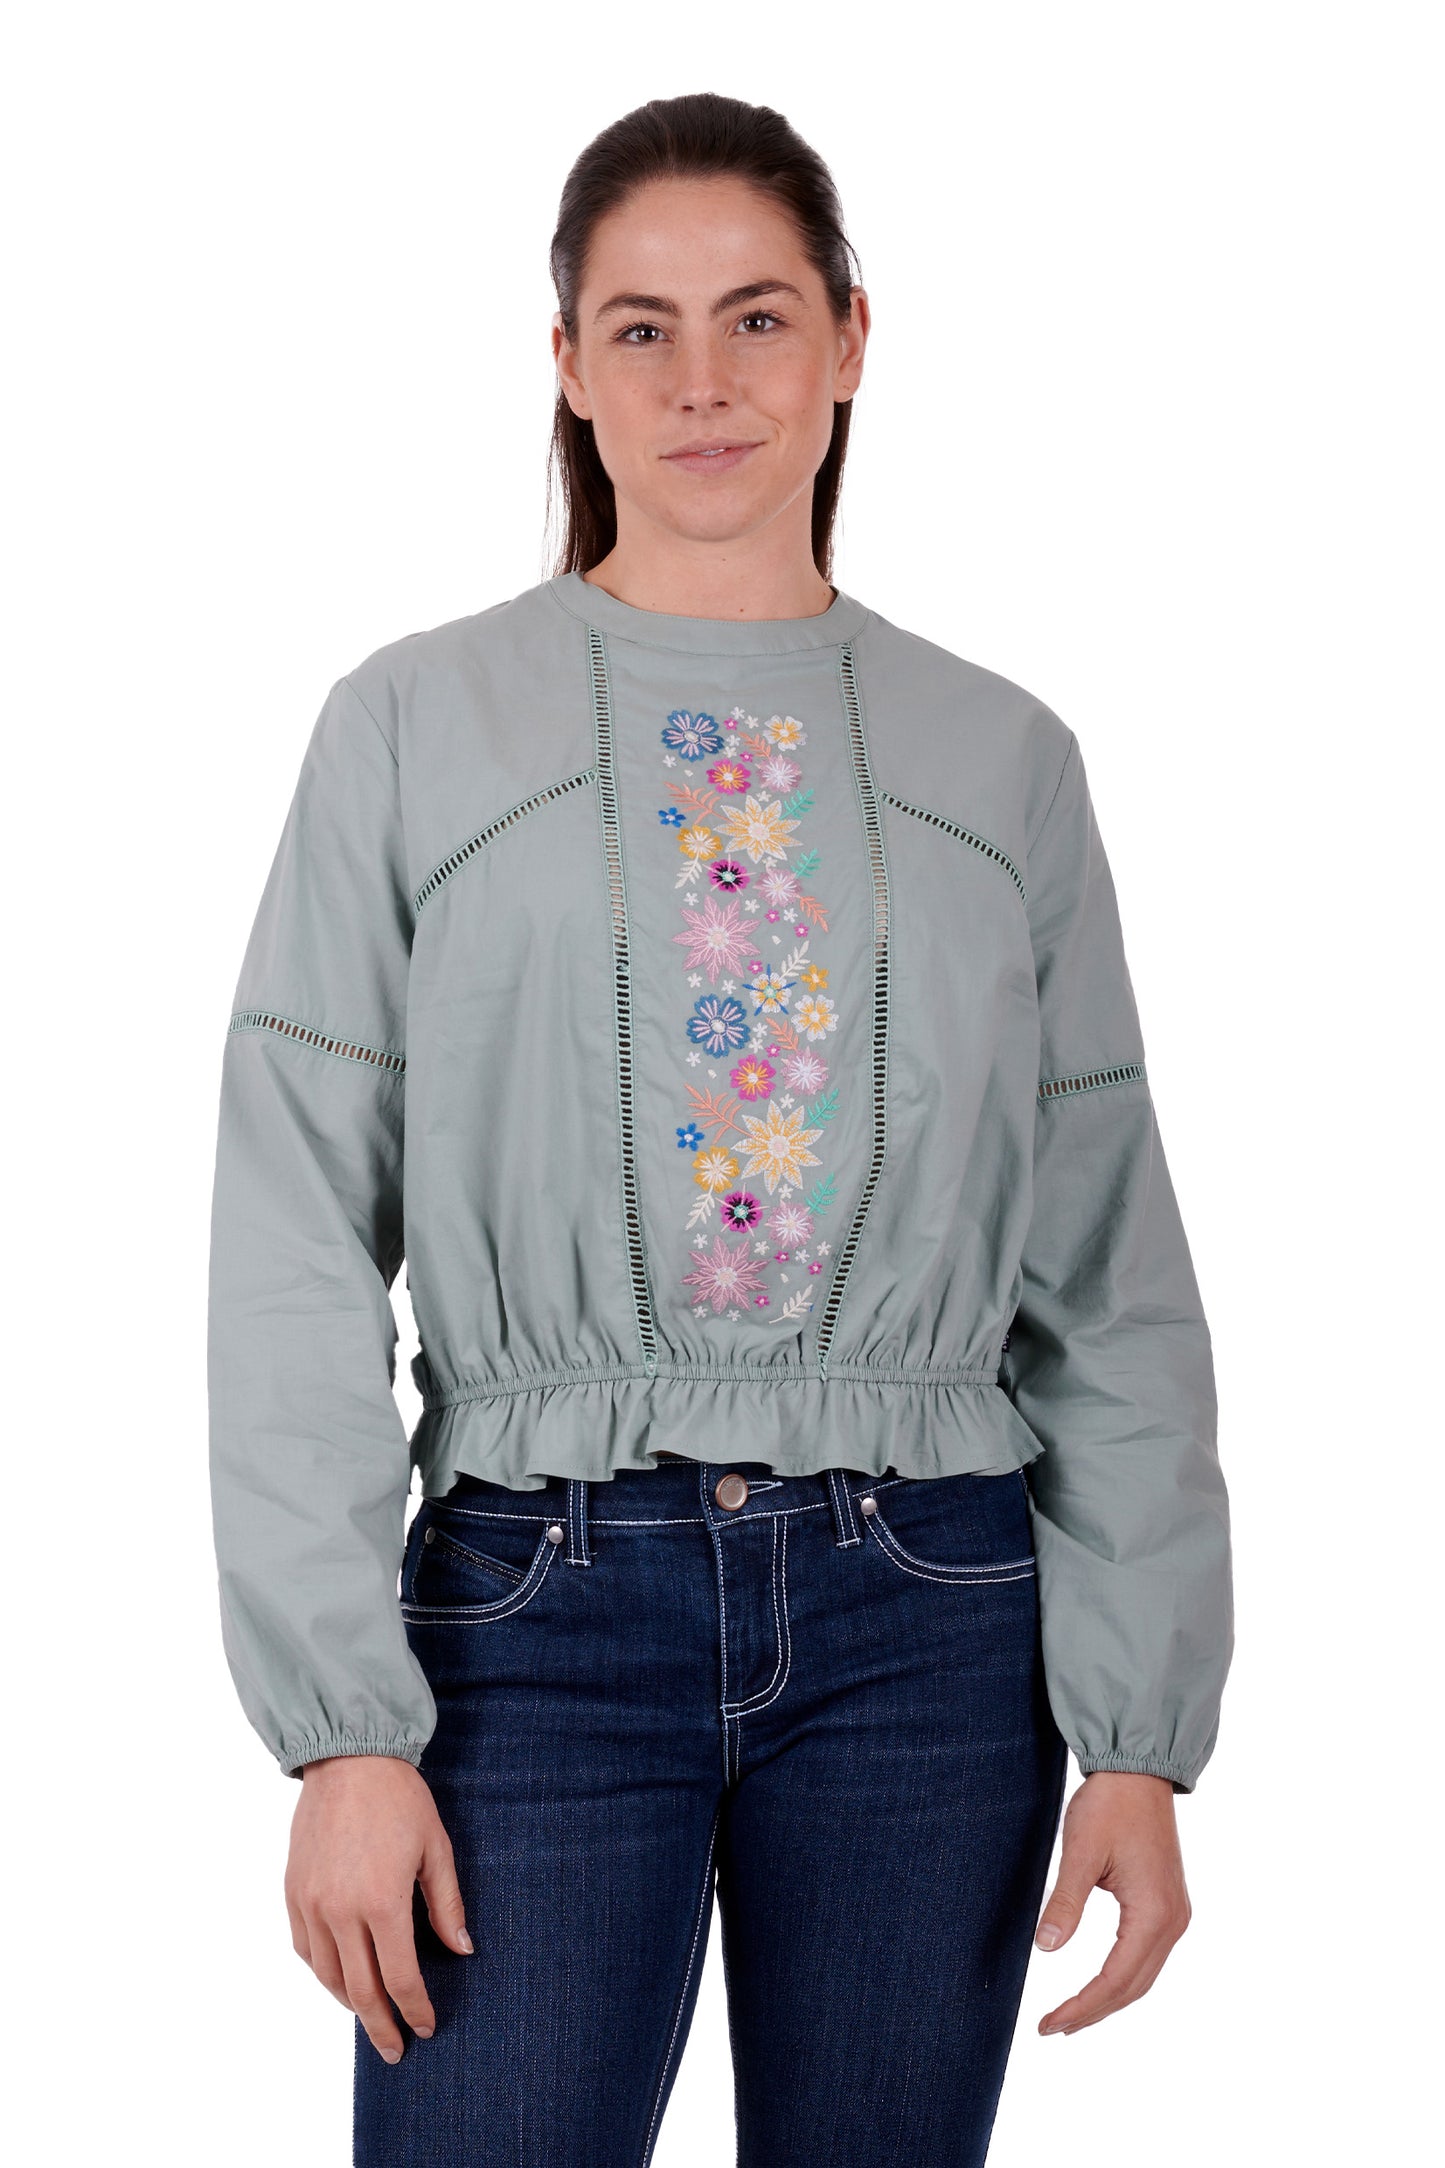 Wrangler Ladies Ryleigh L/S Blouse - Lily Pad - X3S2506594